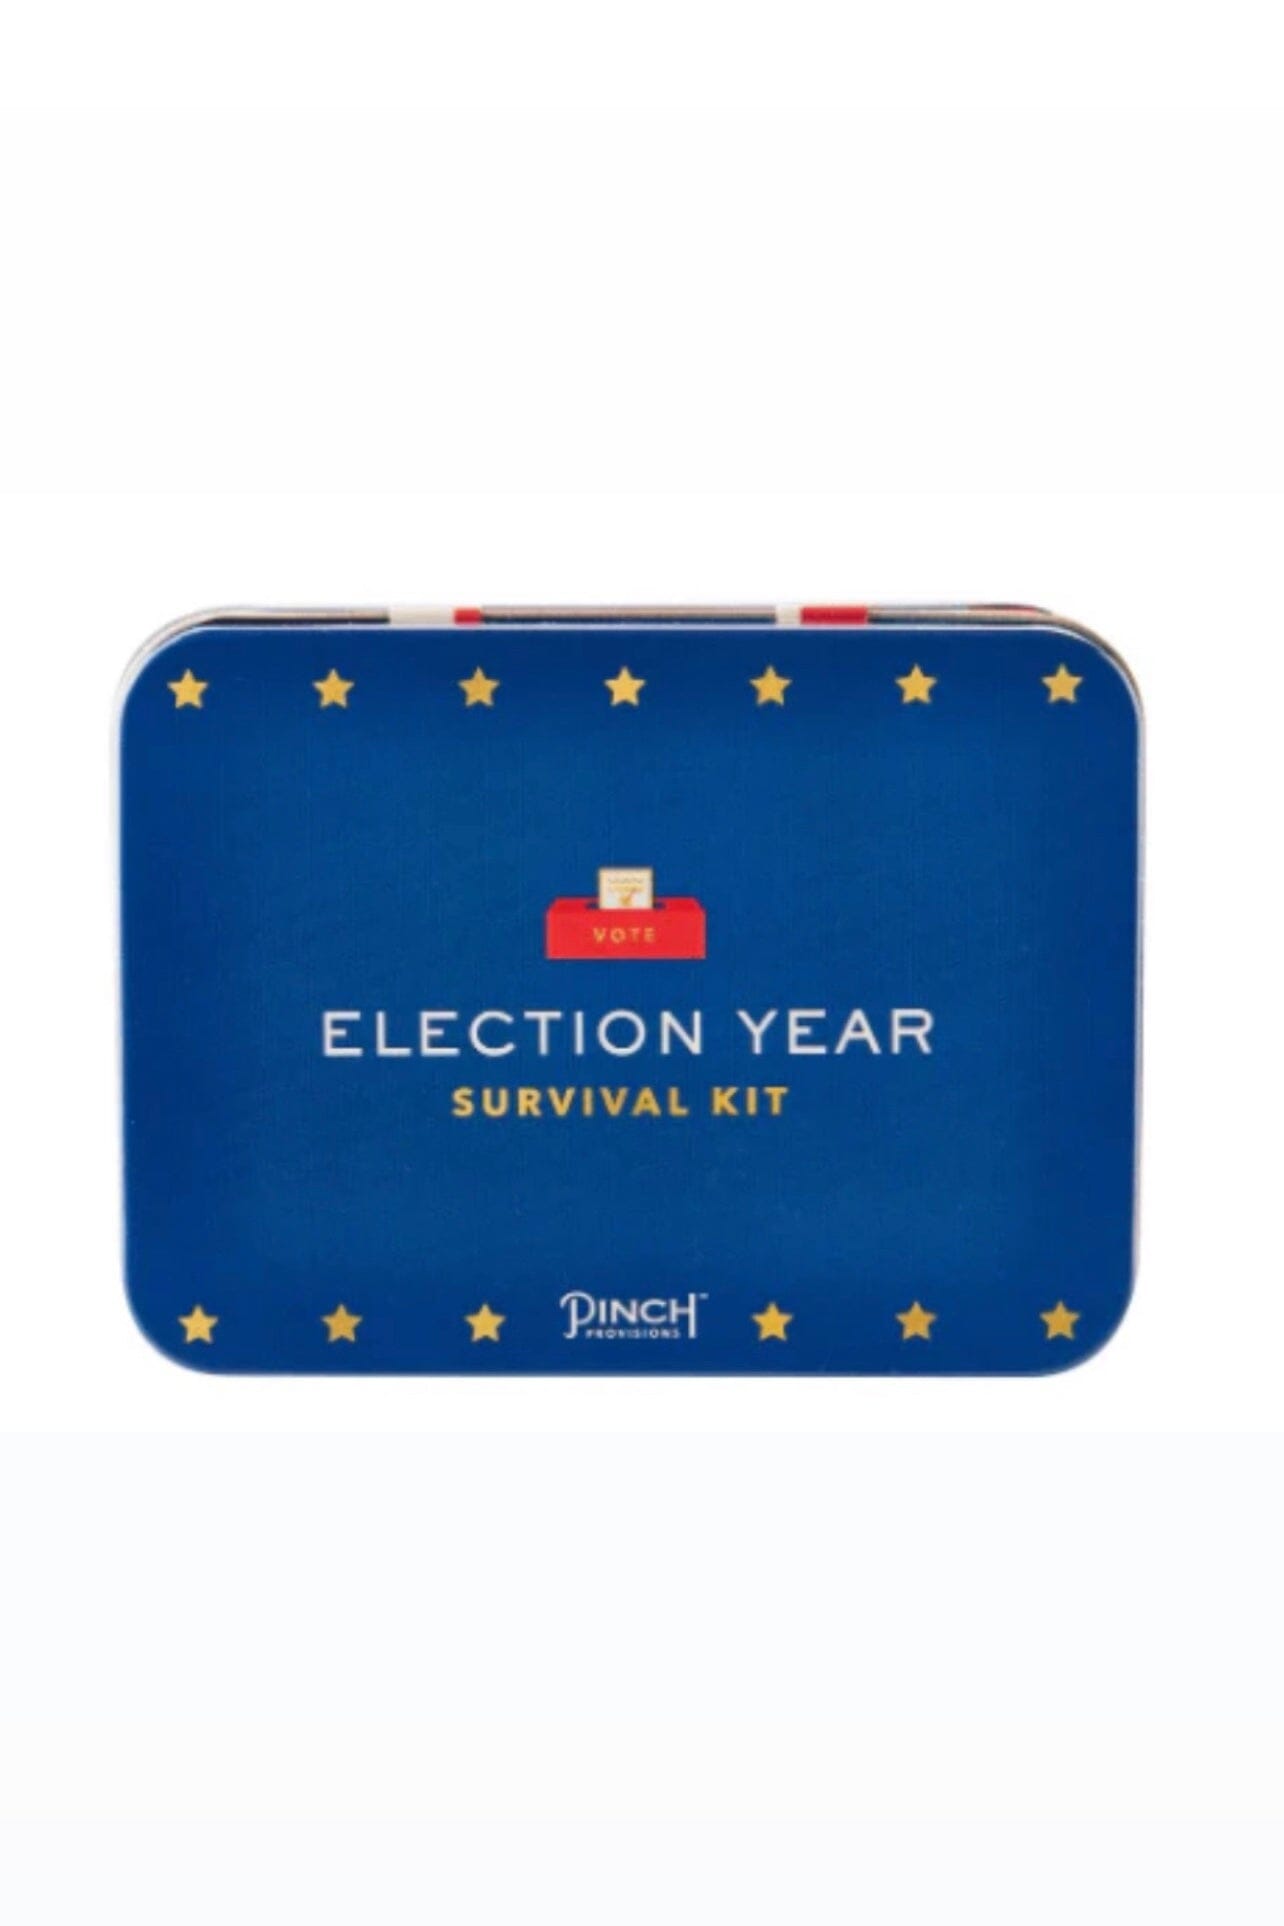 Election Year Survival Kit GIFT/OTHER PINCH PROVISIONS 